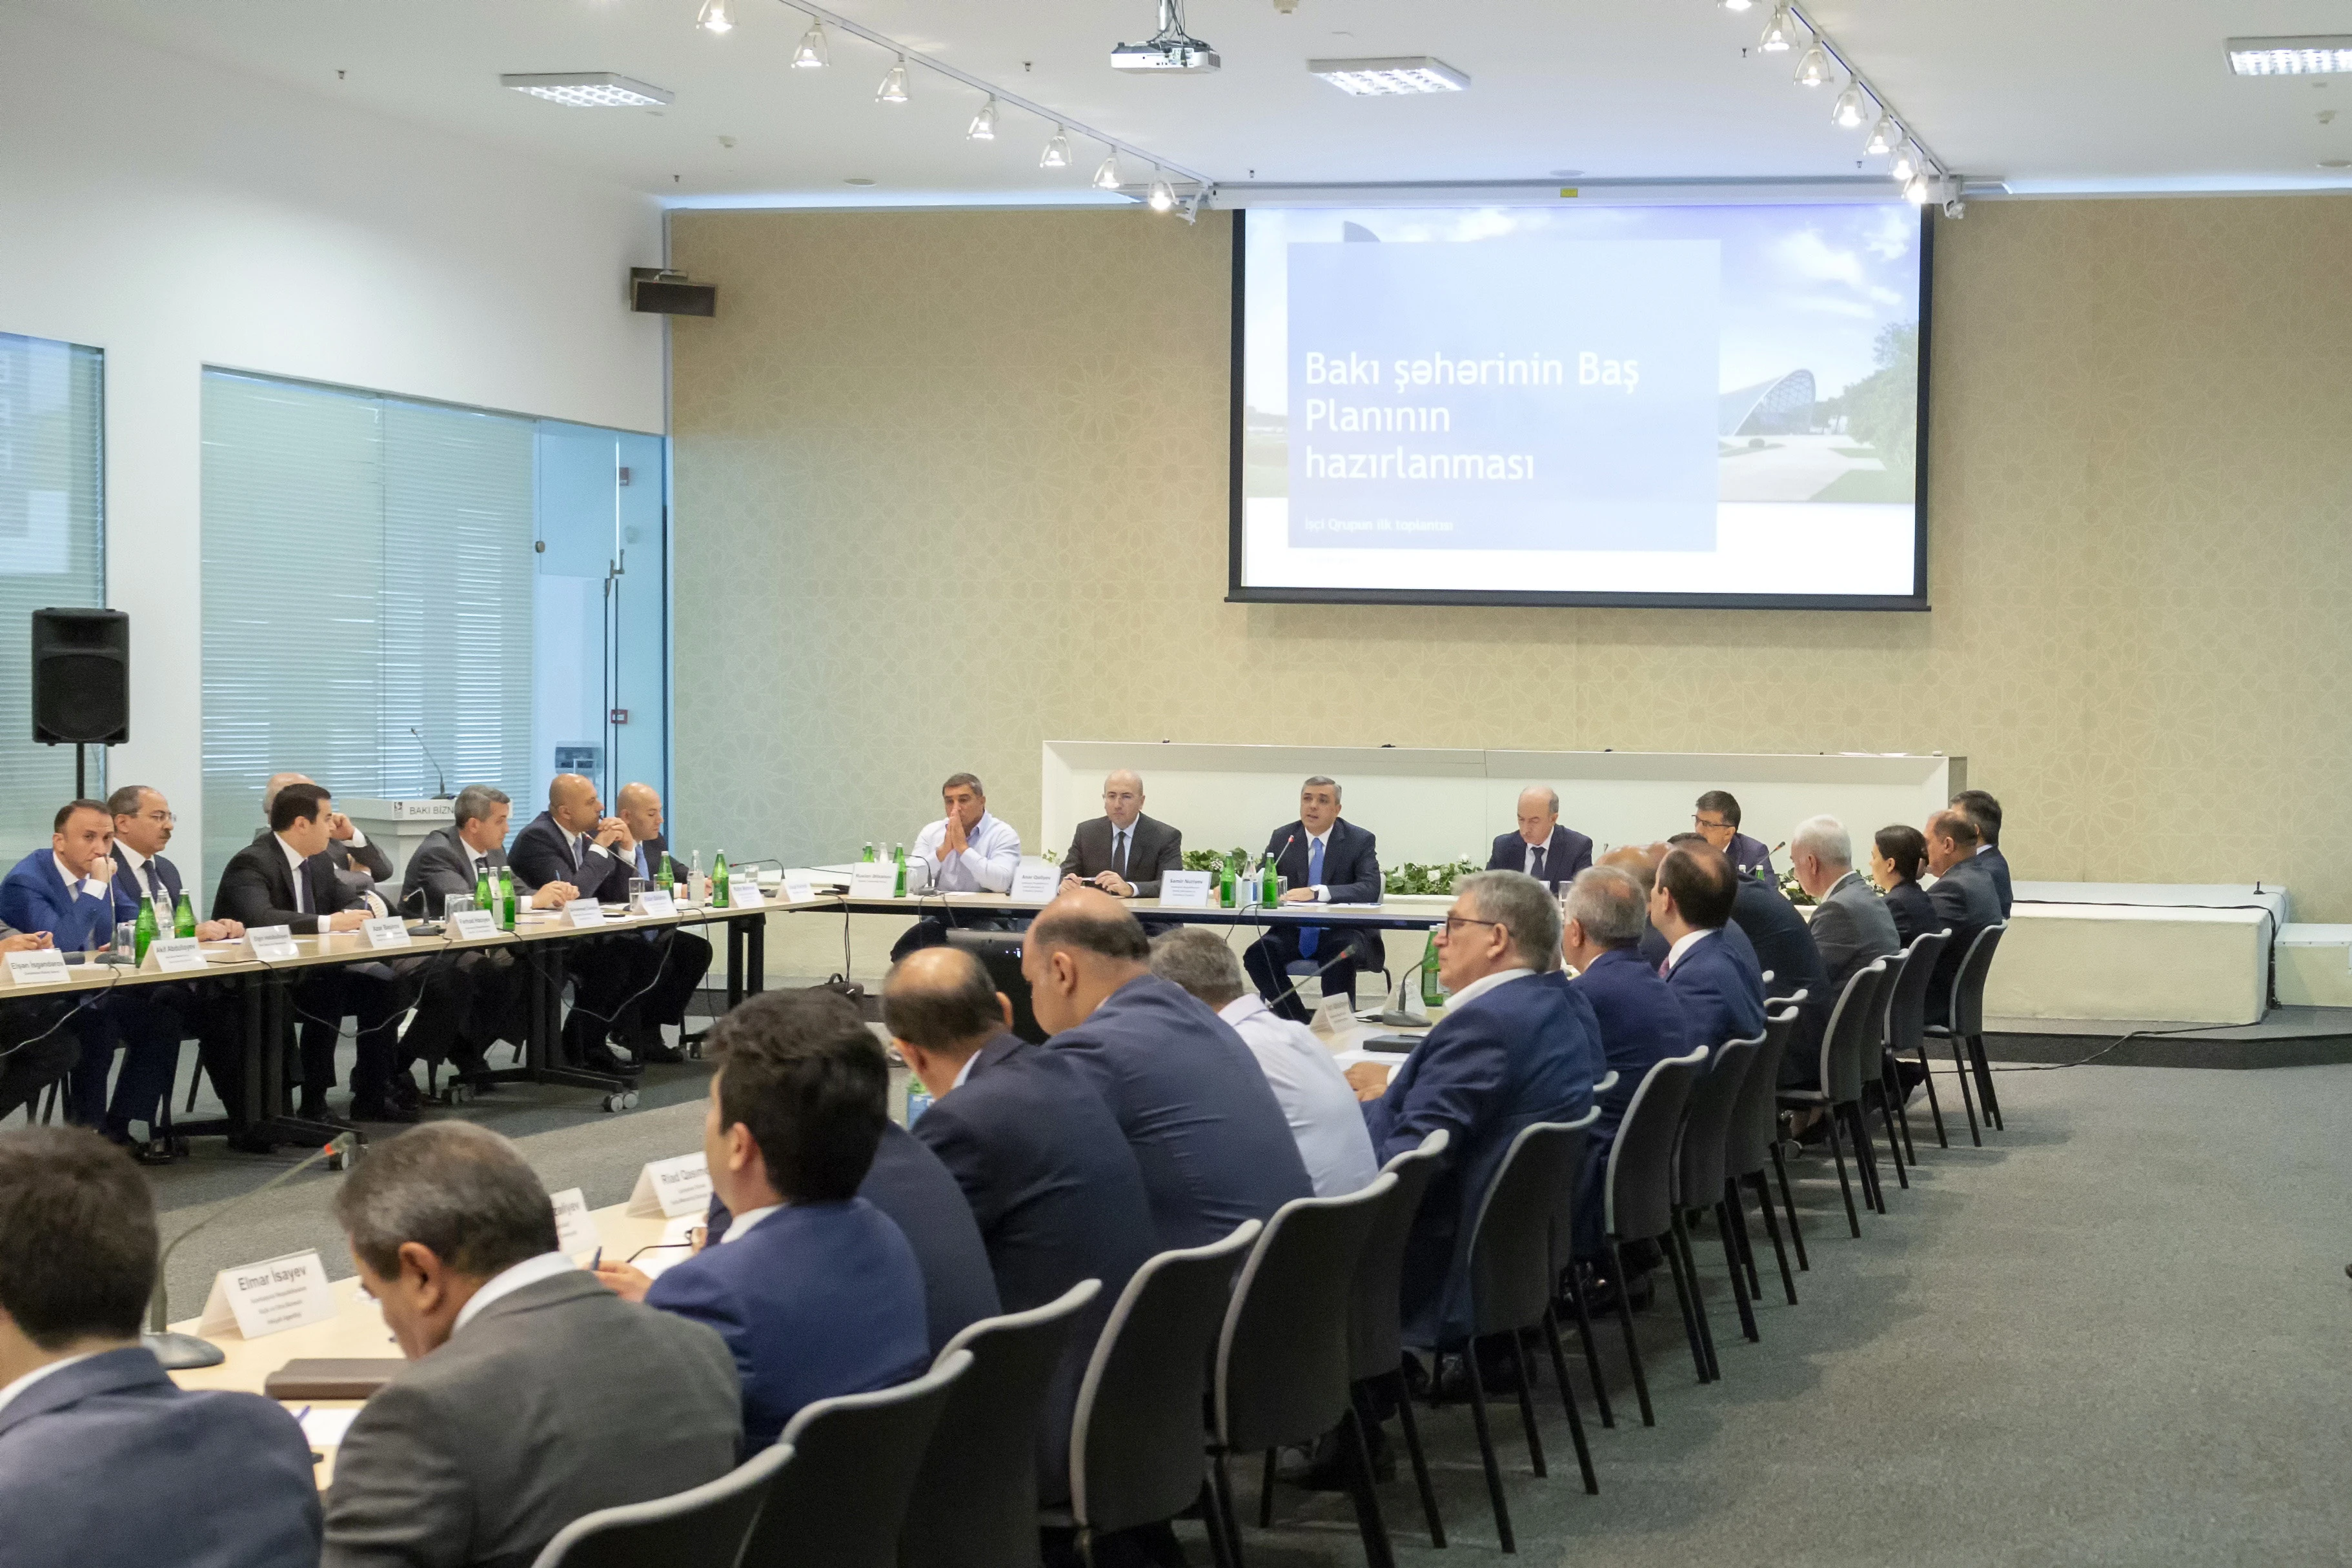 The first meeting of the Interagency Working Group on the preparation of the Master Plan of Baku city was held